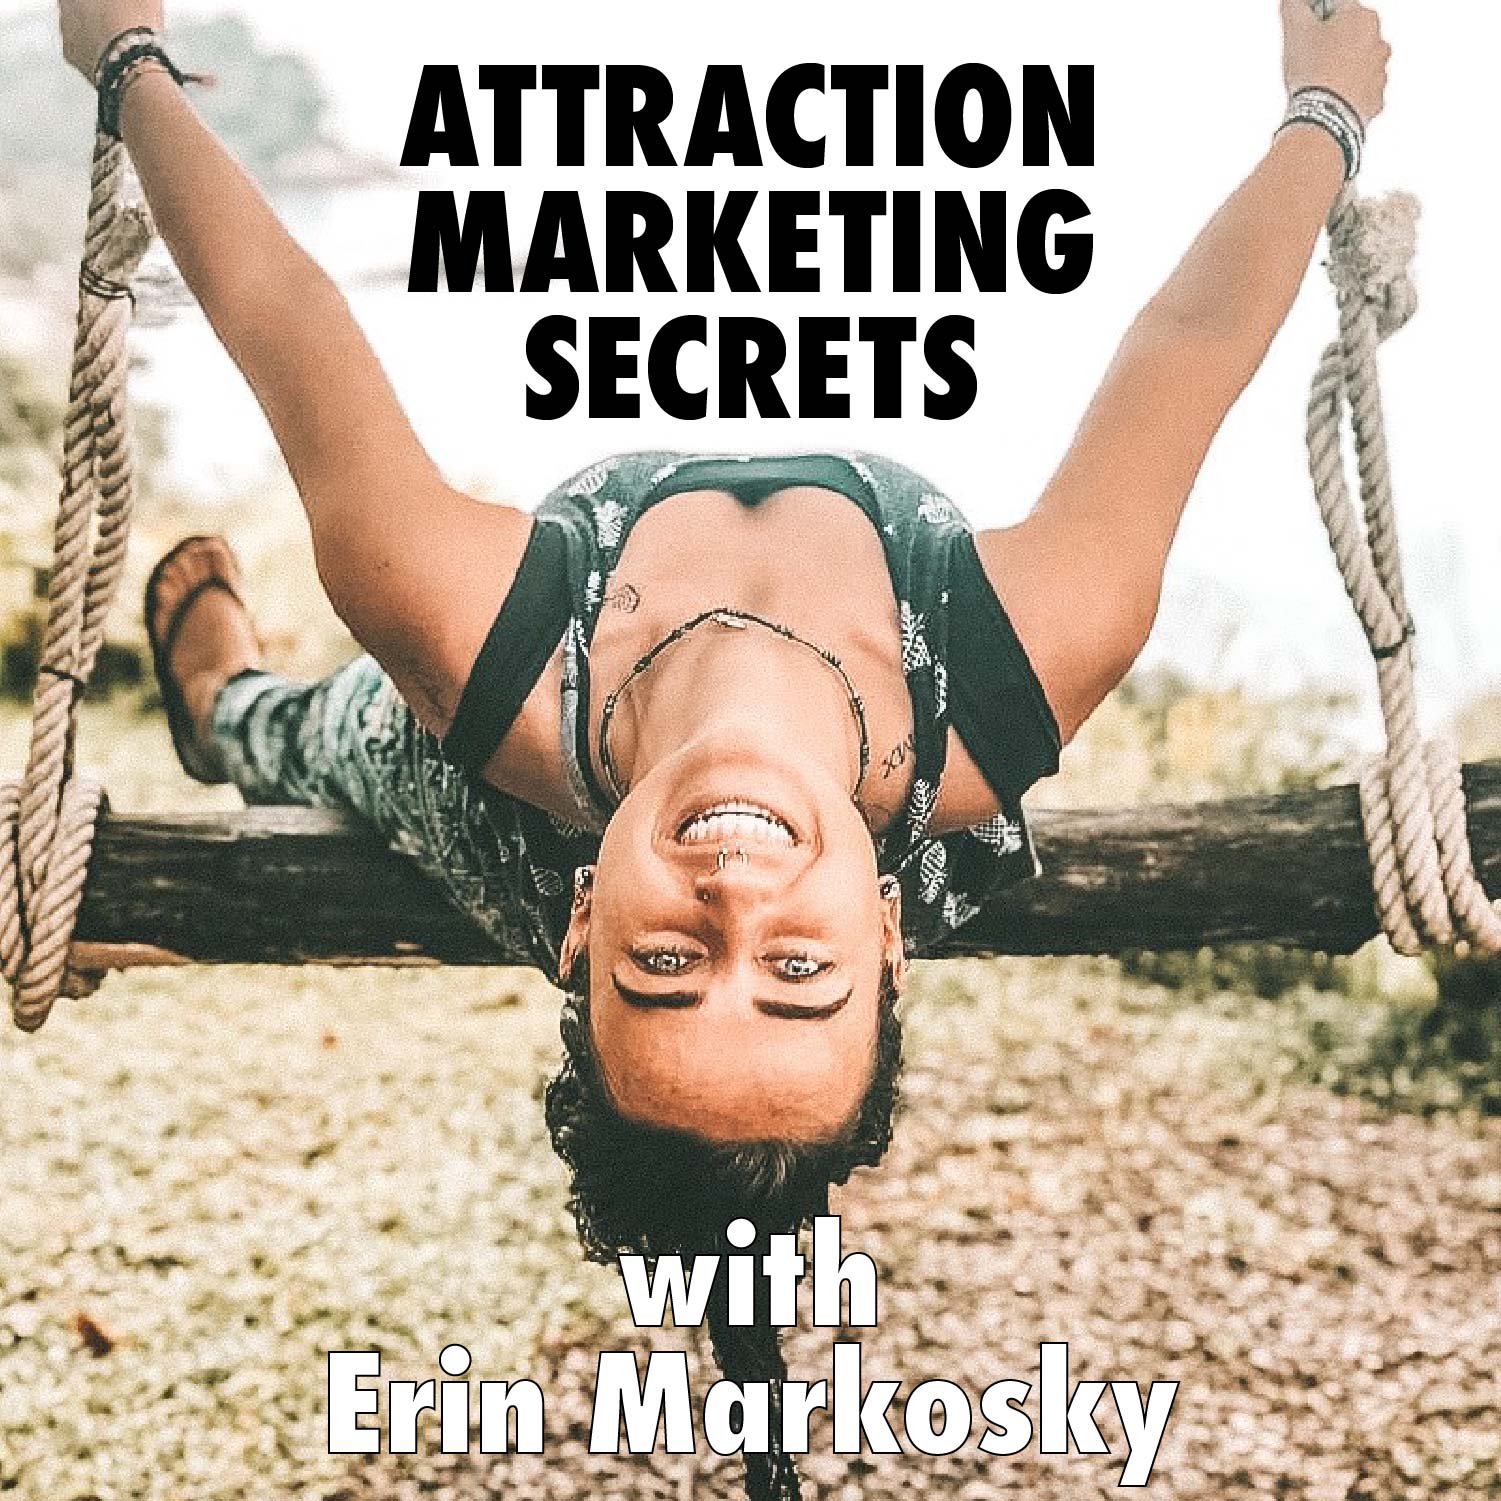 Image of Erin Markosky Title: Attraction Marketing Secrets